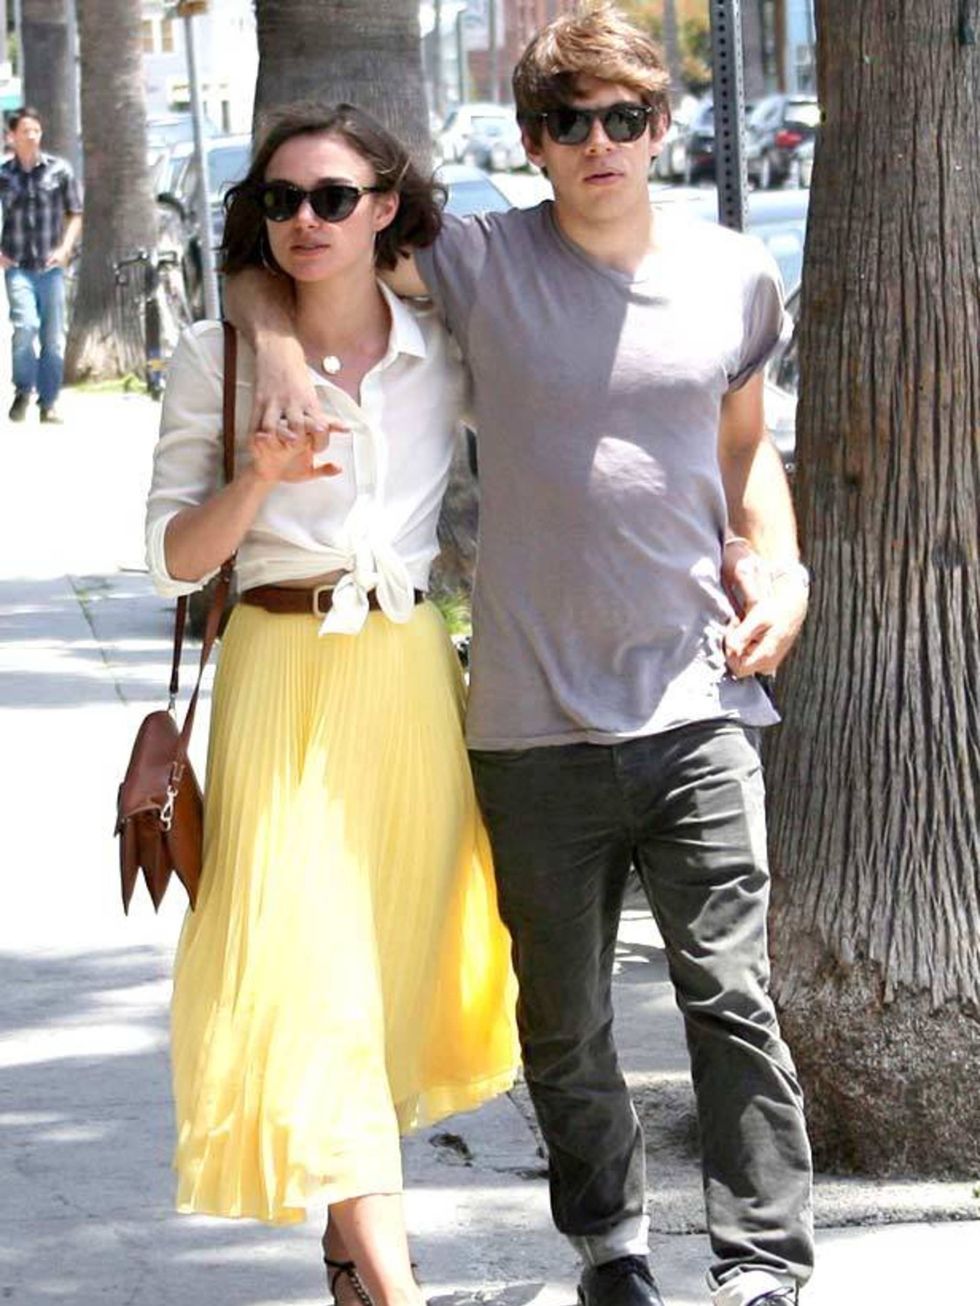 <p><a href="http://www.elleuk.com/starstyle/style-files/(section)/keira-knightley">Keira Knightley</a> looking effortlessly chic in a pleated Whistles skirt, white shirt and flat sandals while walking with her boyfriend</p>